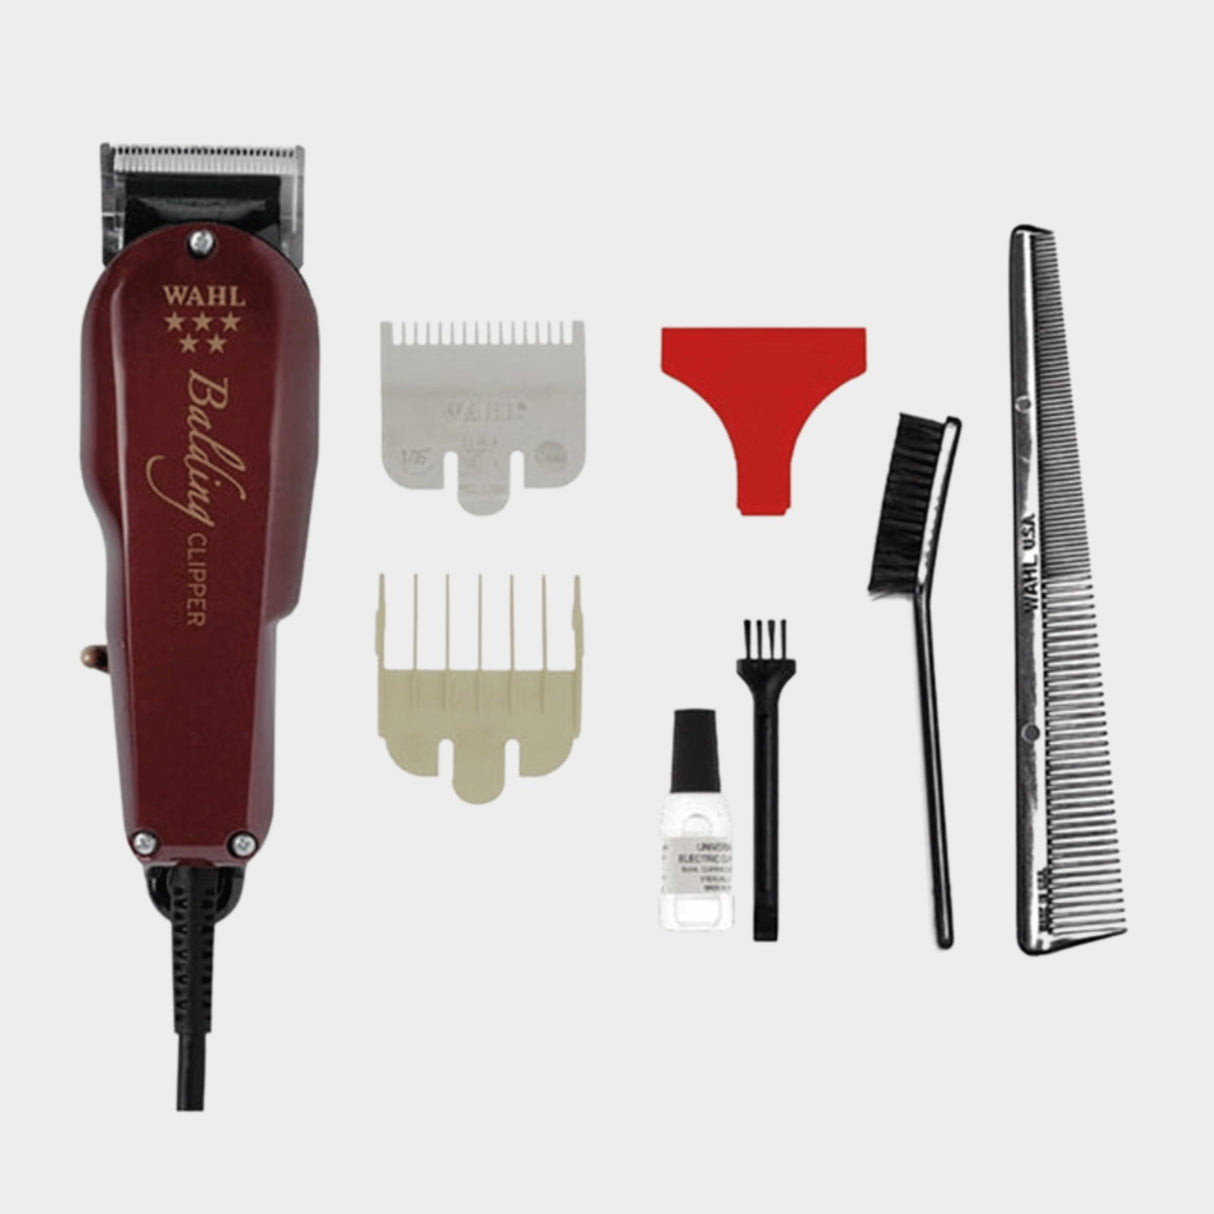 Wahl Professional 5-Star Balding Clipper with 2105 Blade - KWT Tech Mart